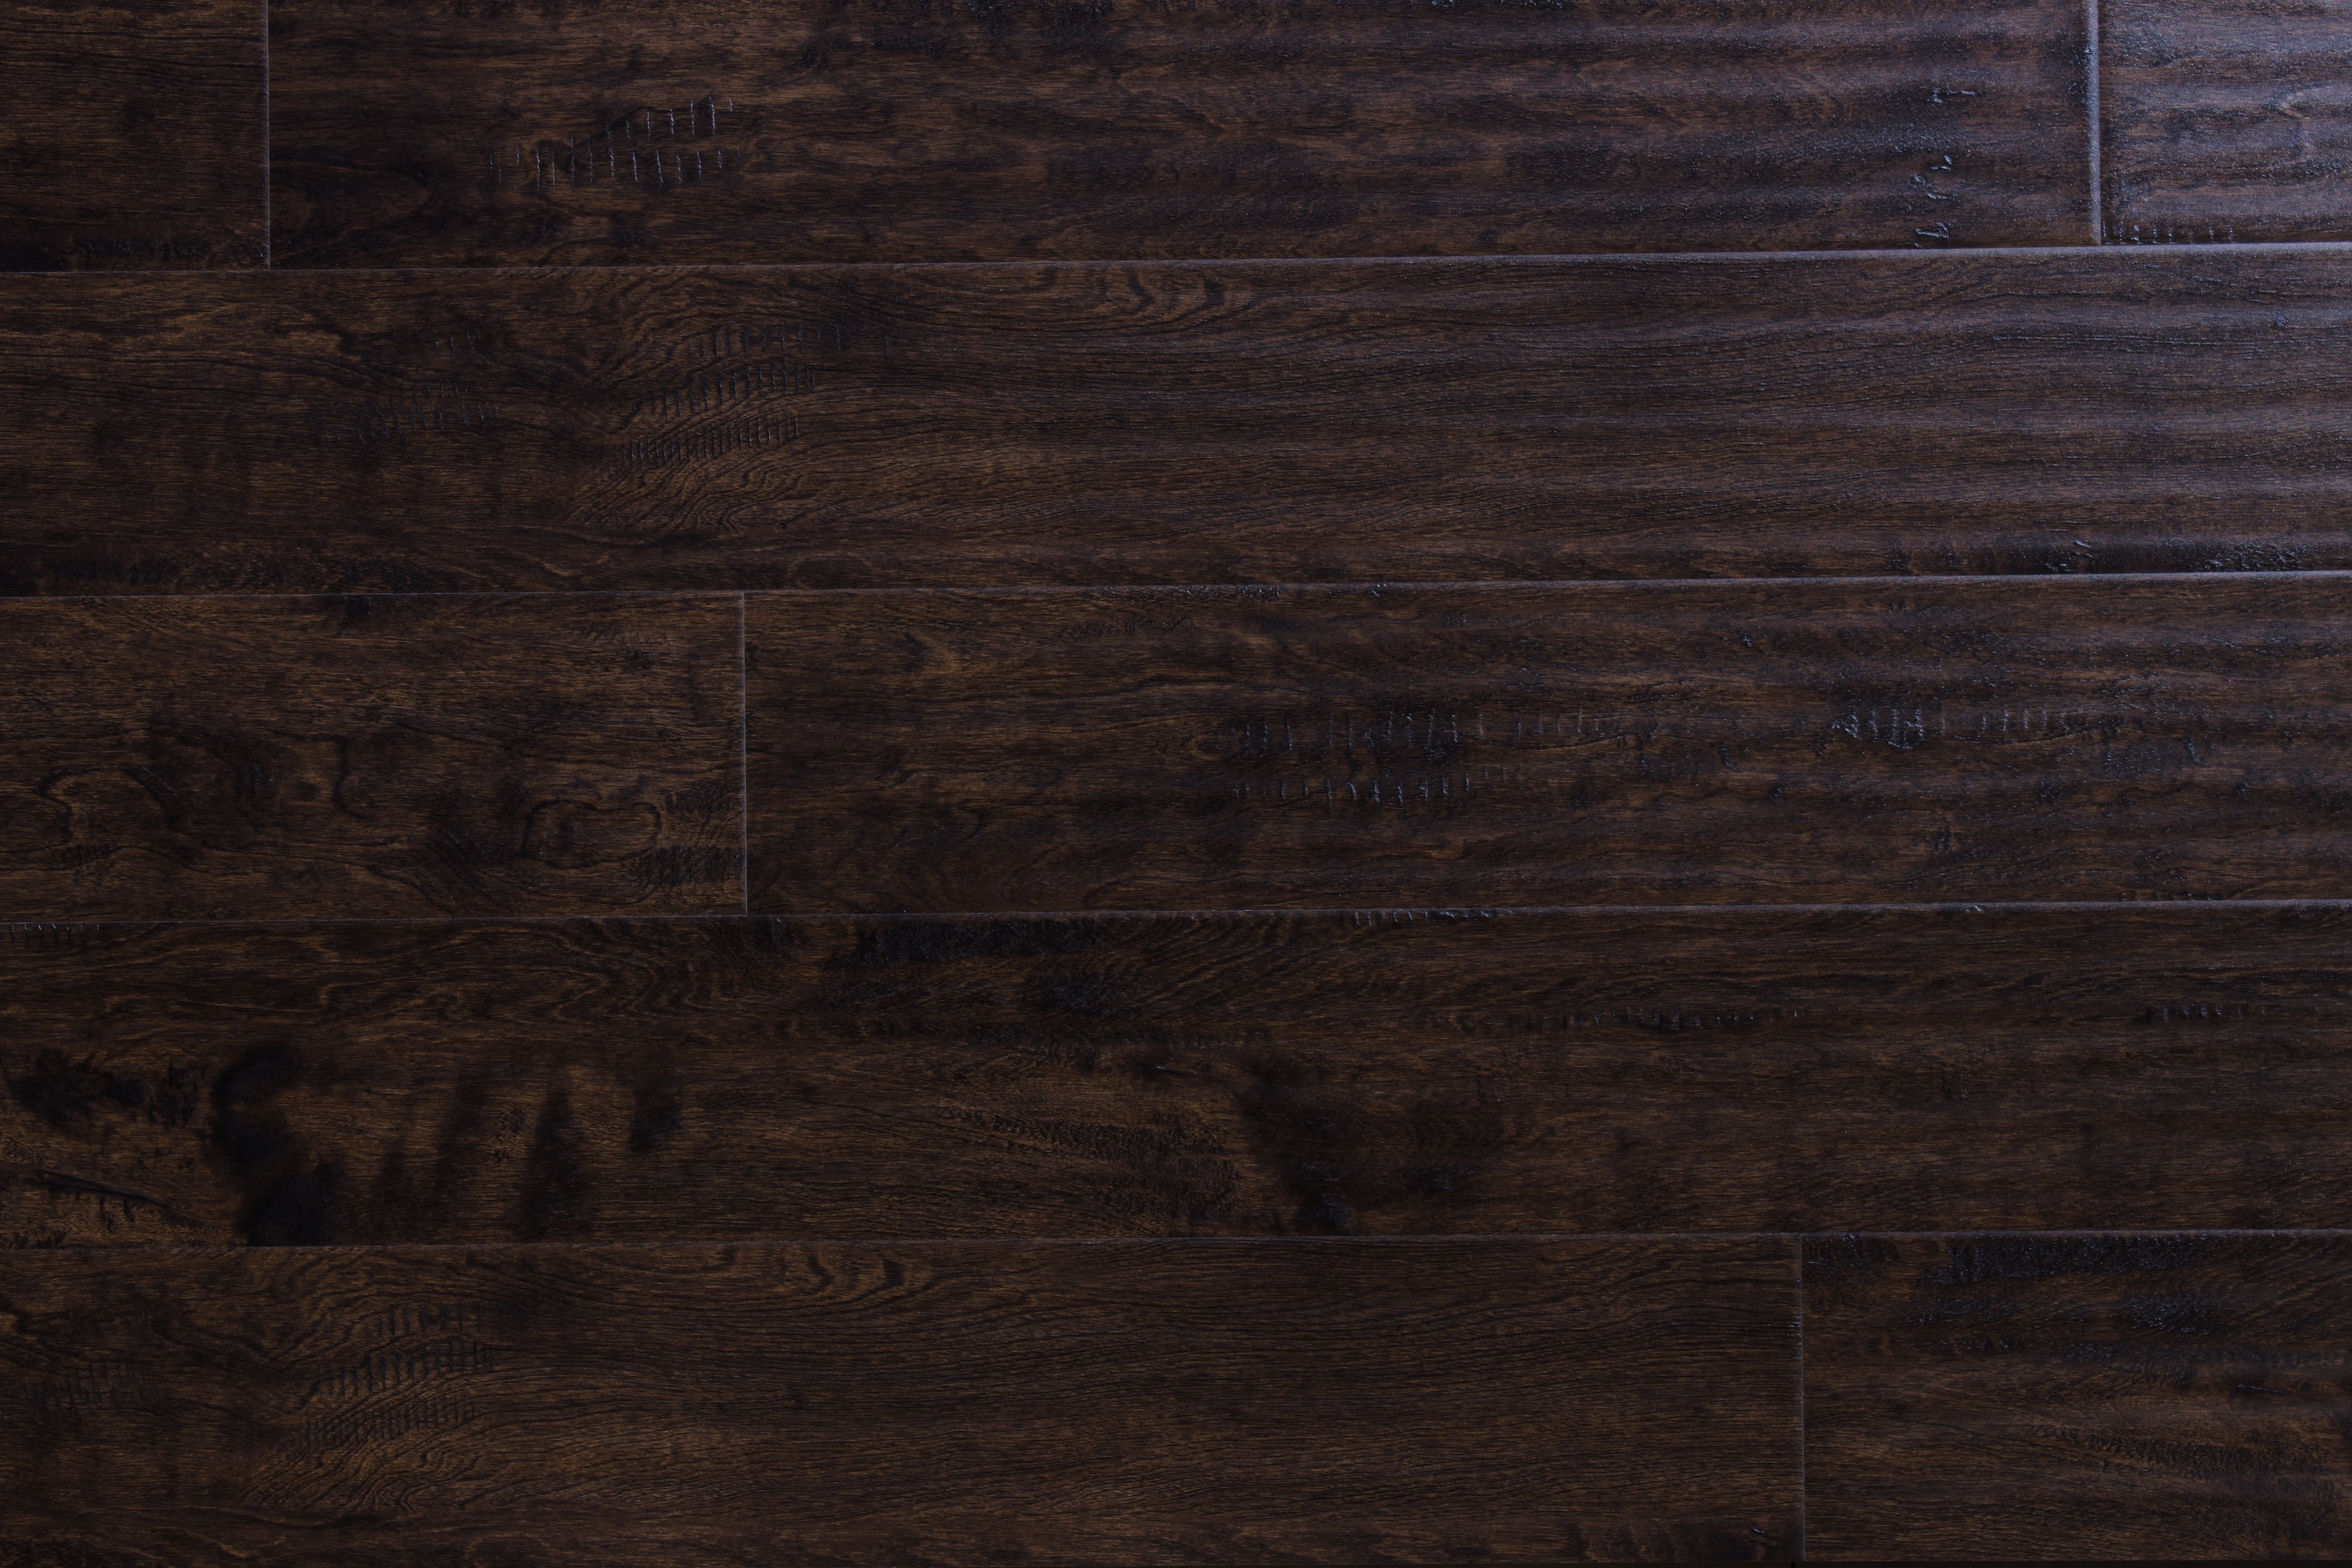 19 Spectacular Hardwood Flooring Square Foot Price 2024 free download hardwood flooring square foot price of wood flooring free samples available at builddirecta throughout tailor multi gb 5874277bb8d3c